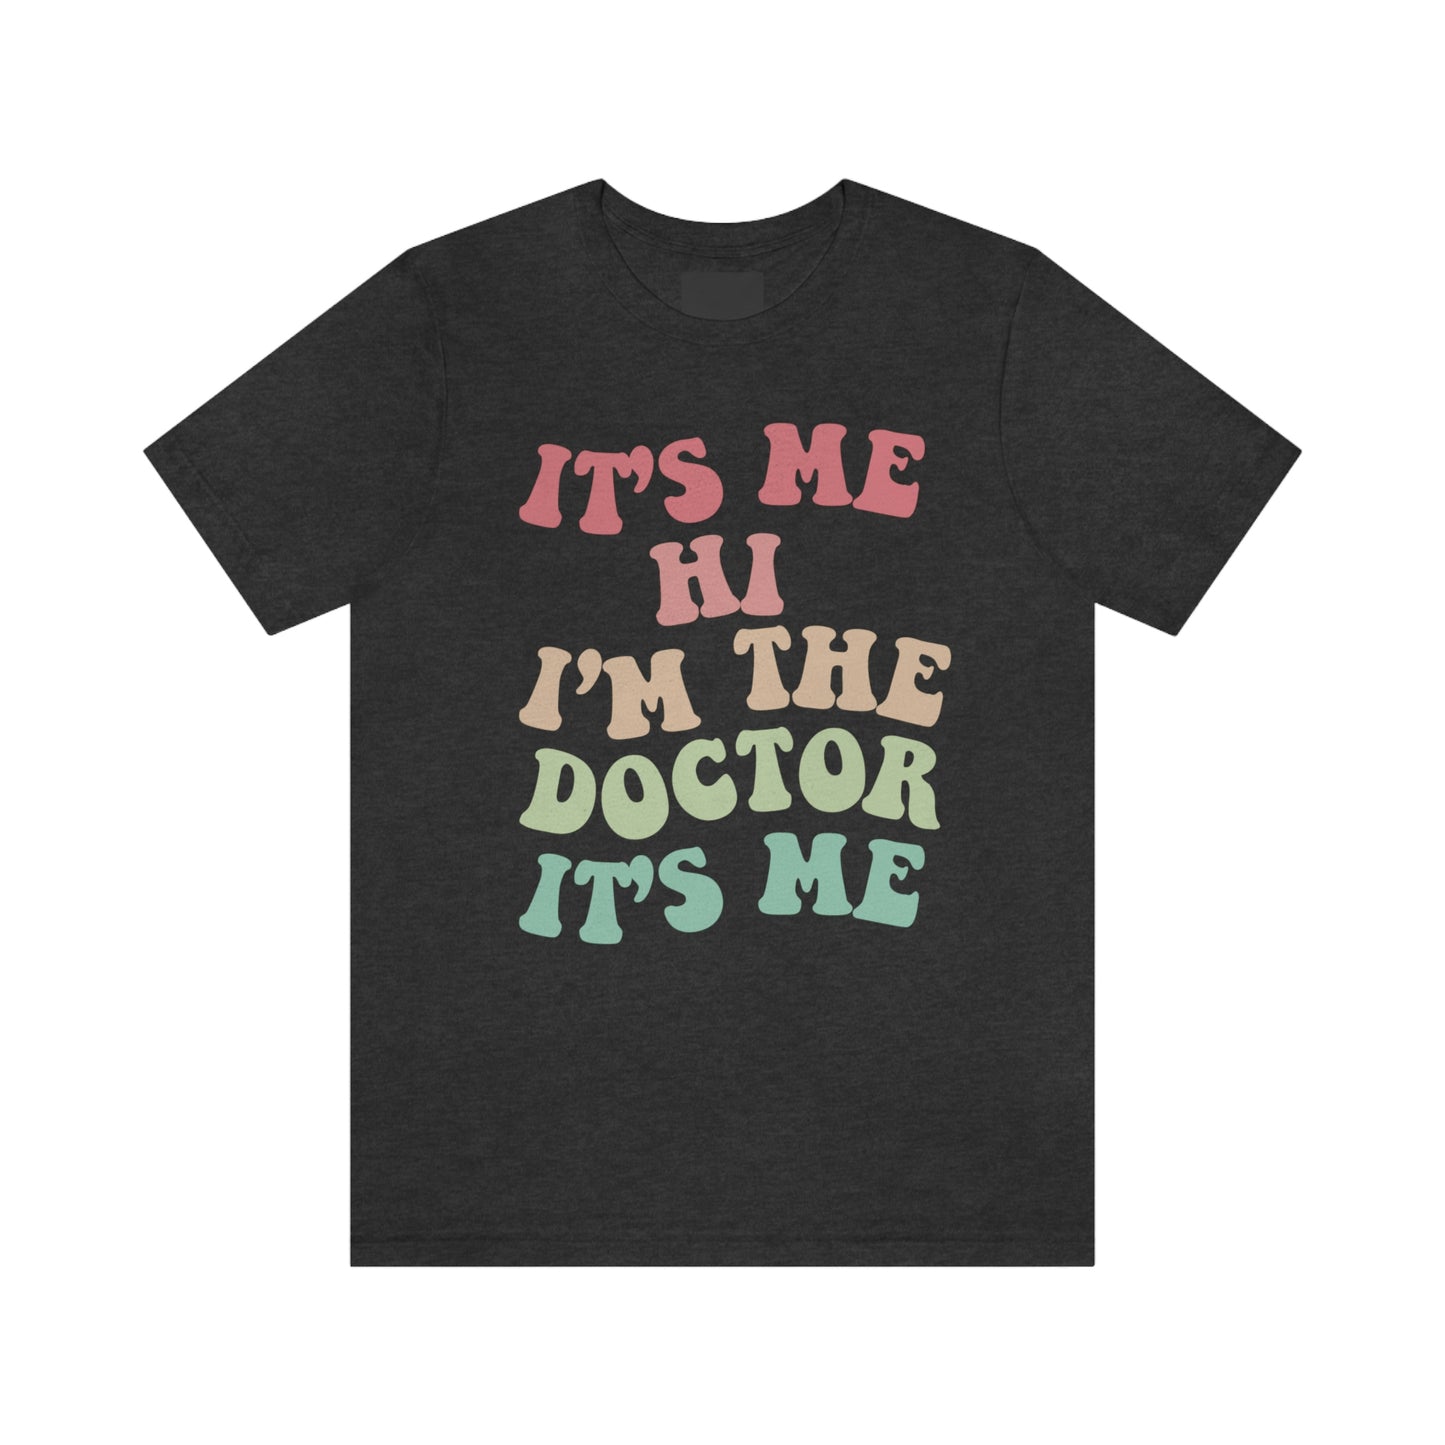 Funny Trending Shirt, Its Me Hi Im the Doctor Its Me Tshirt, Taylor Swiftie, T-shirt, Funny Sayings Shirt, Doctor, Healthcare